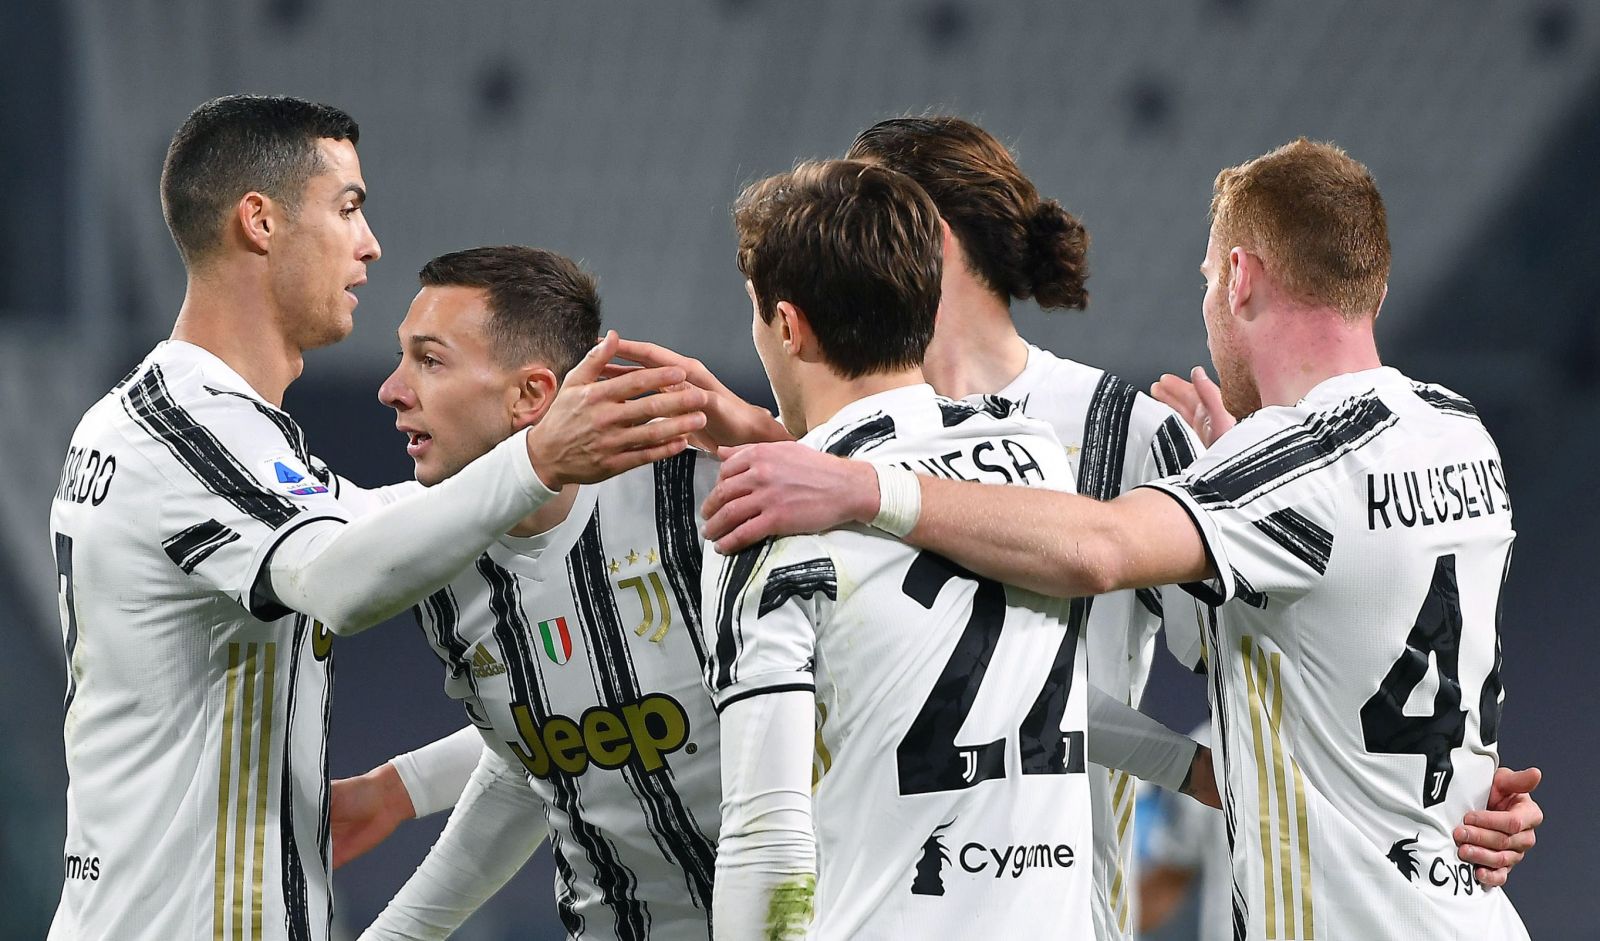 epa09047349 Juventus’ players celebrate the 2-0 lead during the Italian Serie A soccer match Juventus FC vs Spezia Calcio at the Allianz stadium in Turin, Italy, 02 March 2021.  EPA/ALESSANDRO DI MARCO